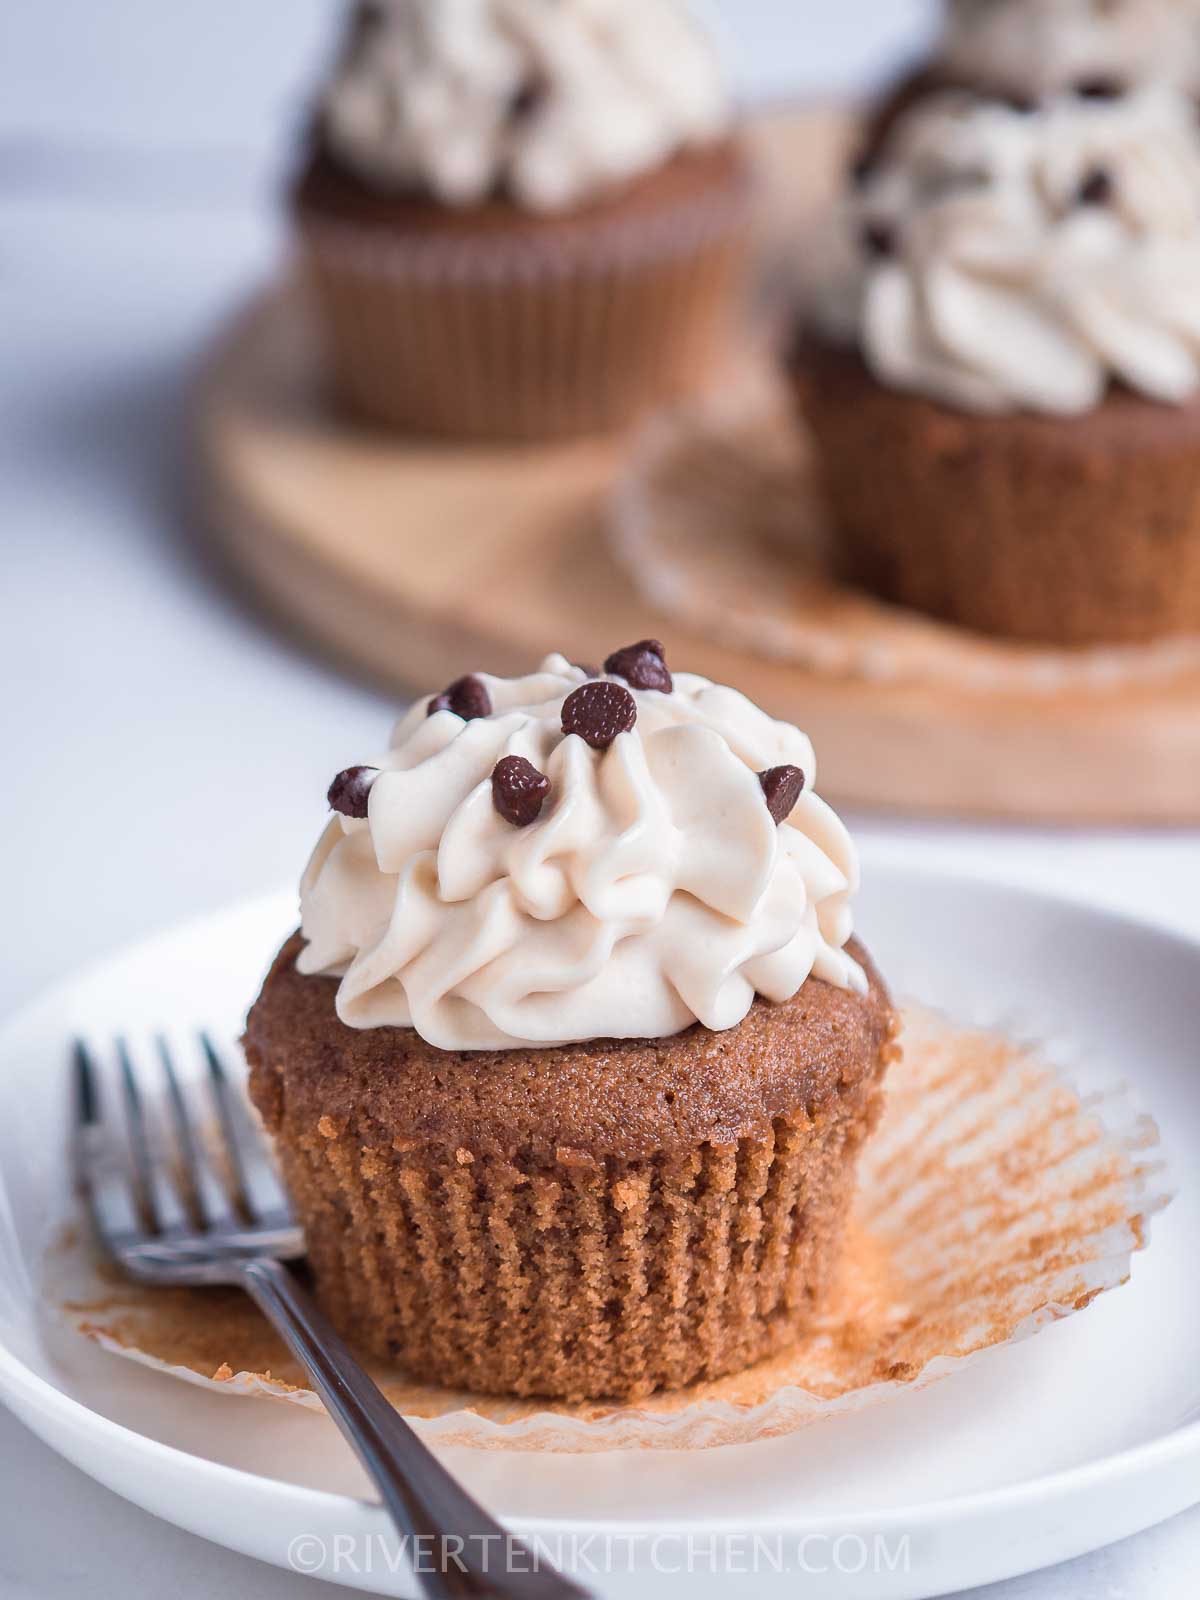 mocha flavored cupcakes with whipped cream frosting and chocolate chips